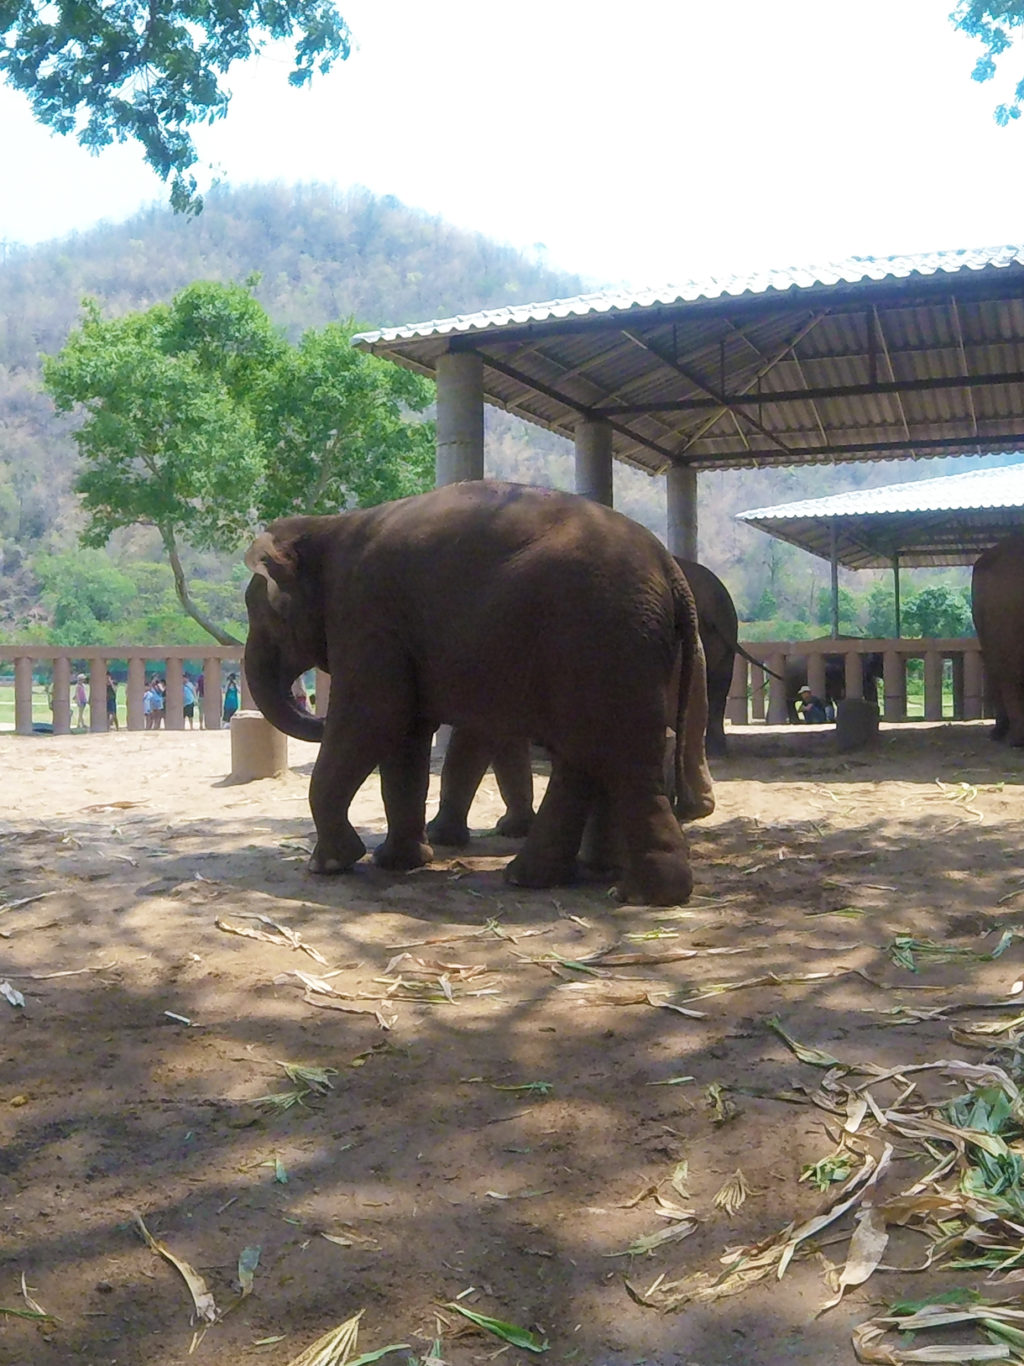 enp, elephant nature park chiang mai, playing with elephants in thailand, elephant abuse in thailand, animal abuse in thailand, riding elephants in thailand, petting tigers in thailand, animal treatment in Thailand